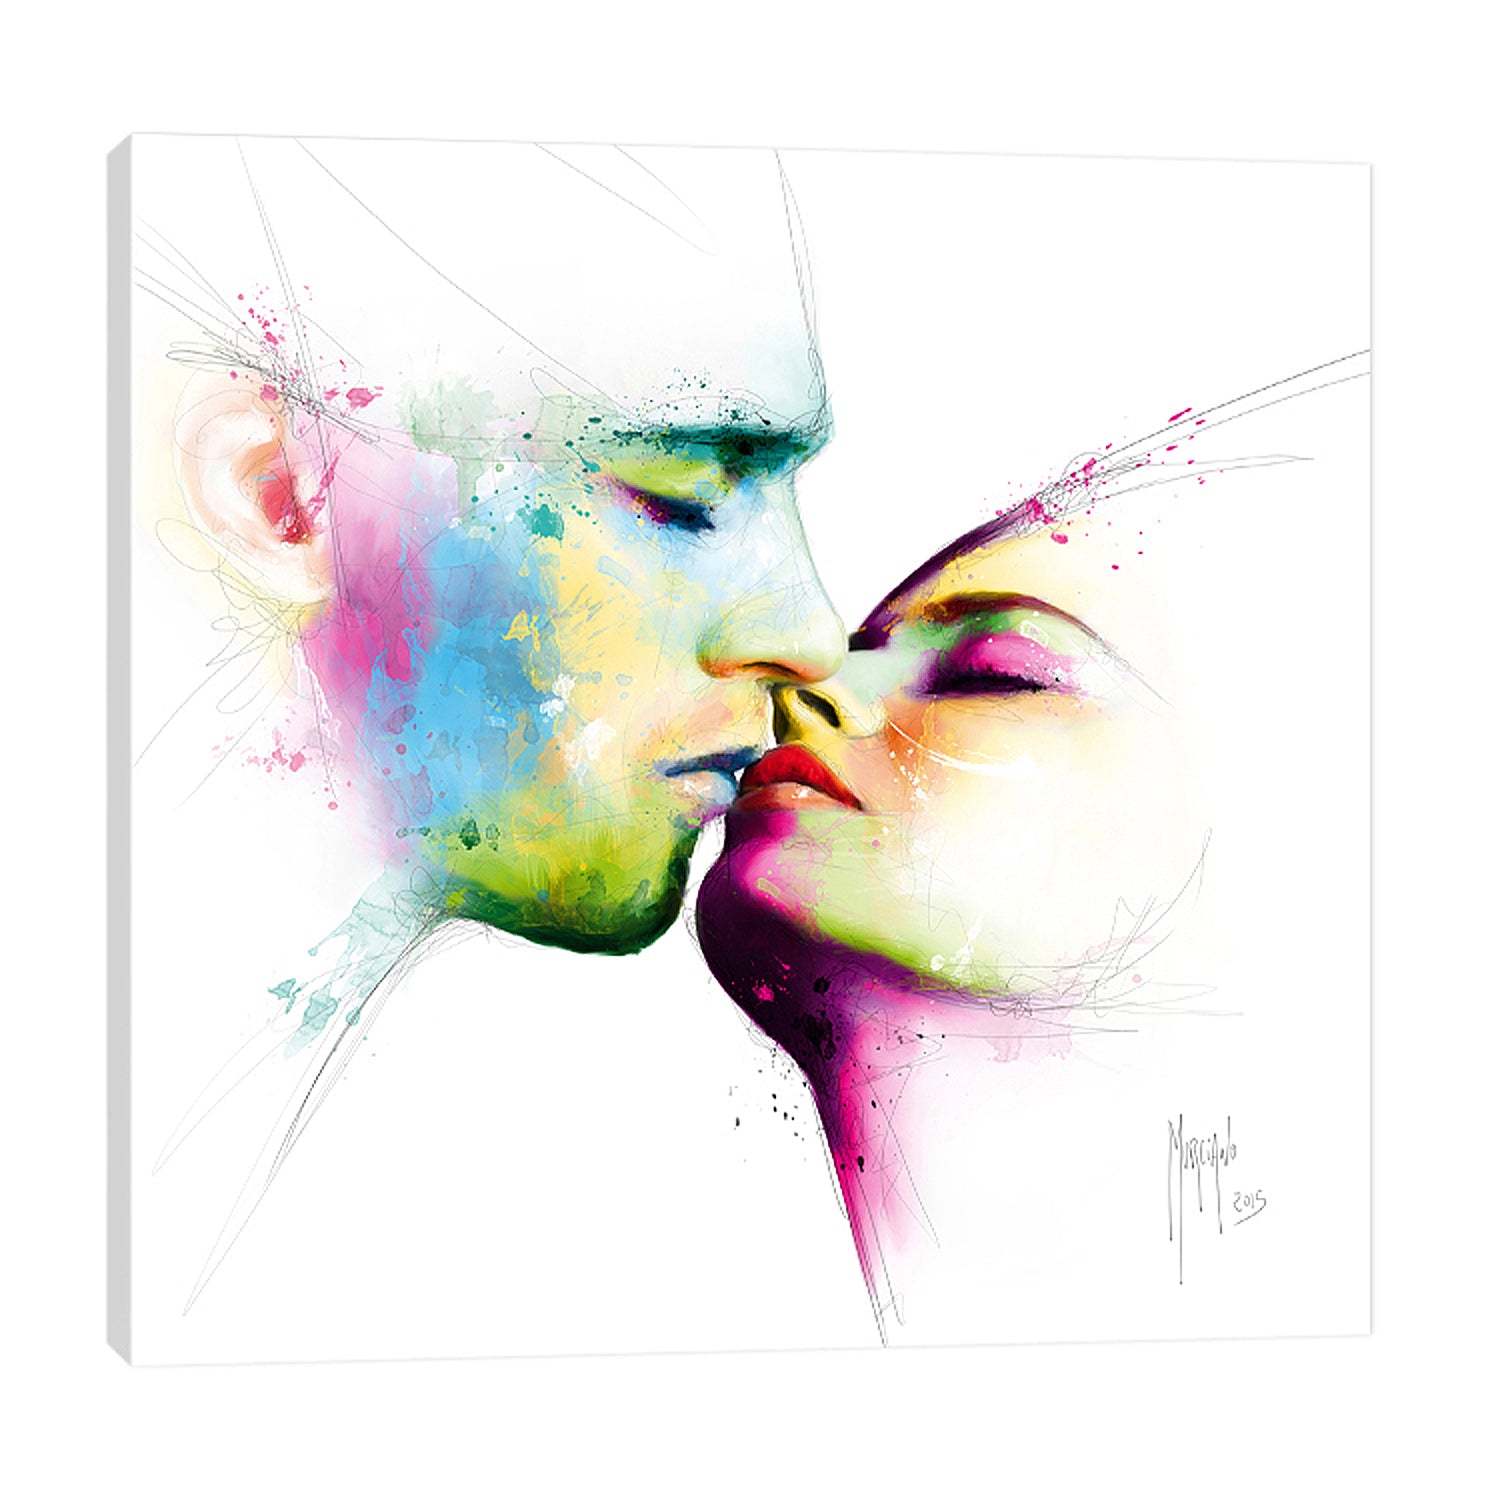 Patrice-Murciano,Modern & Contemporary,People,le baiser,woman,men,couple,love,ombre,lines,splatters,Red,Gray,Charcoal Gray,White